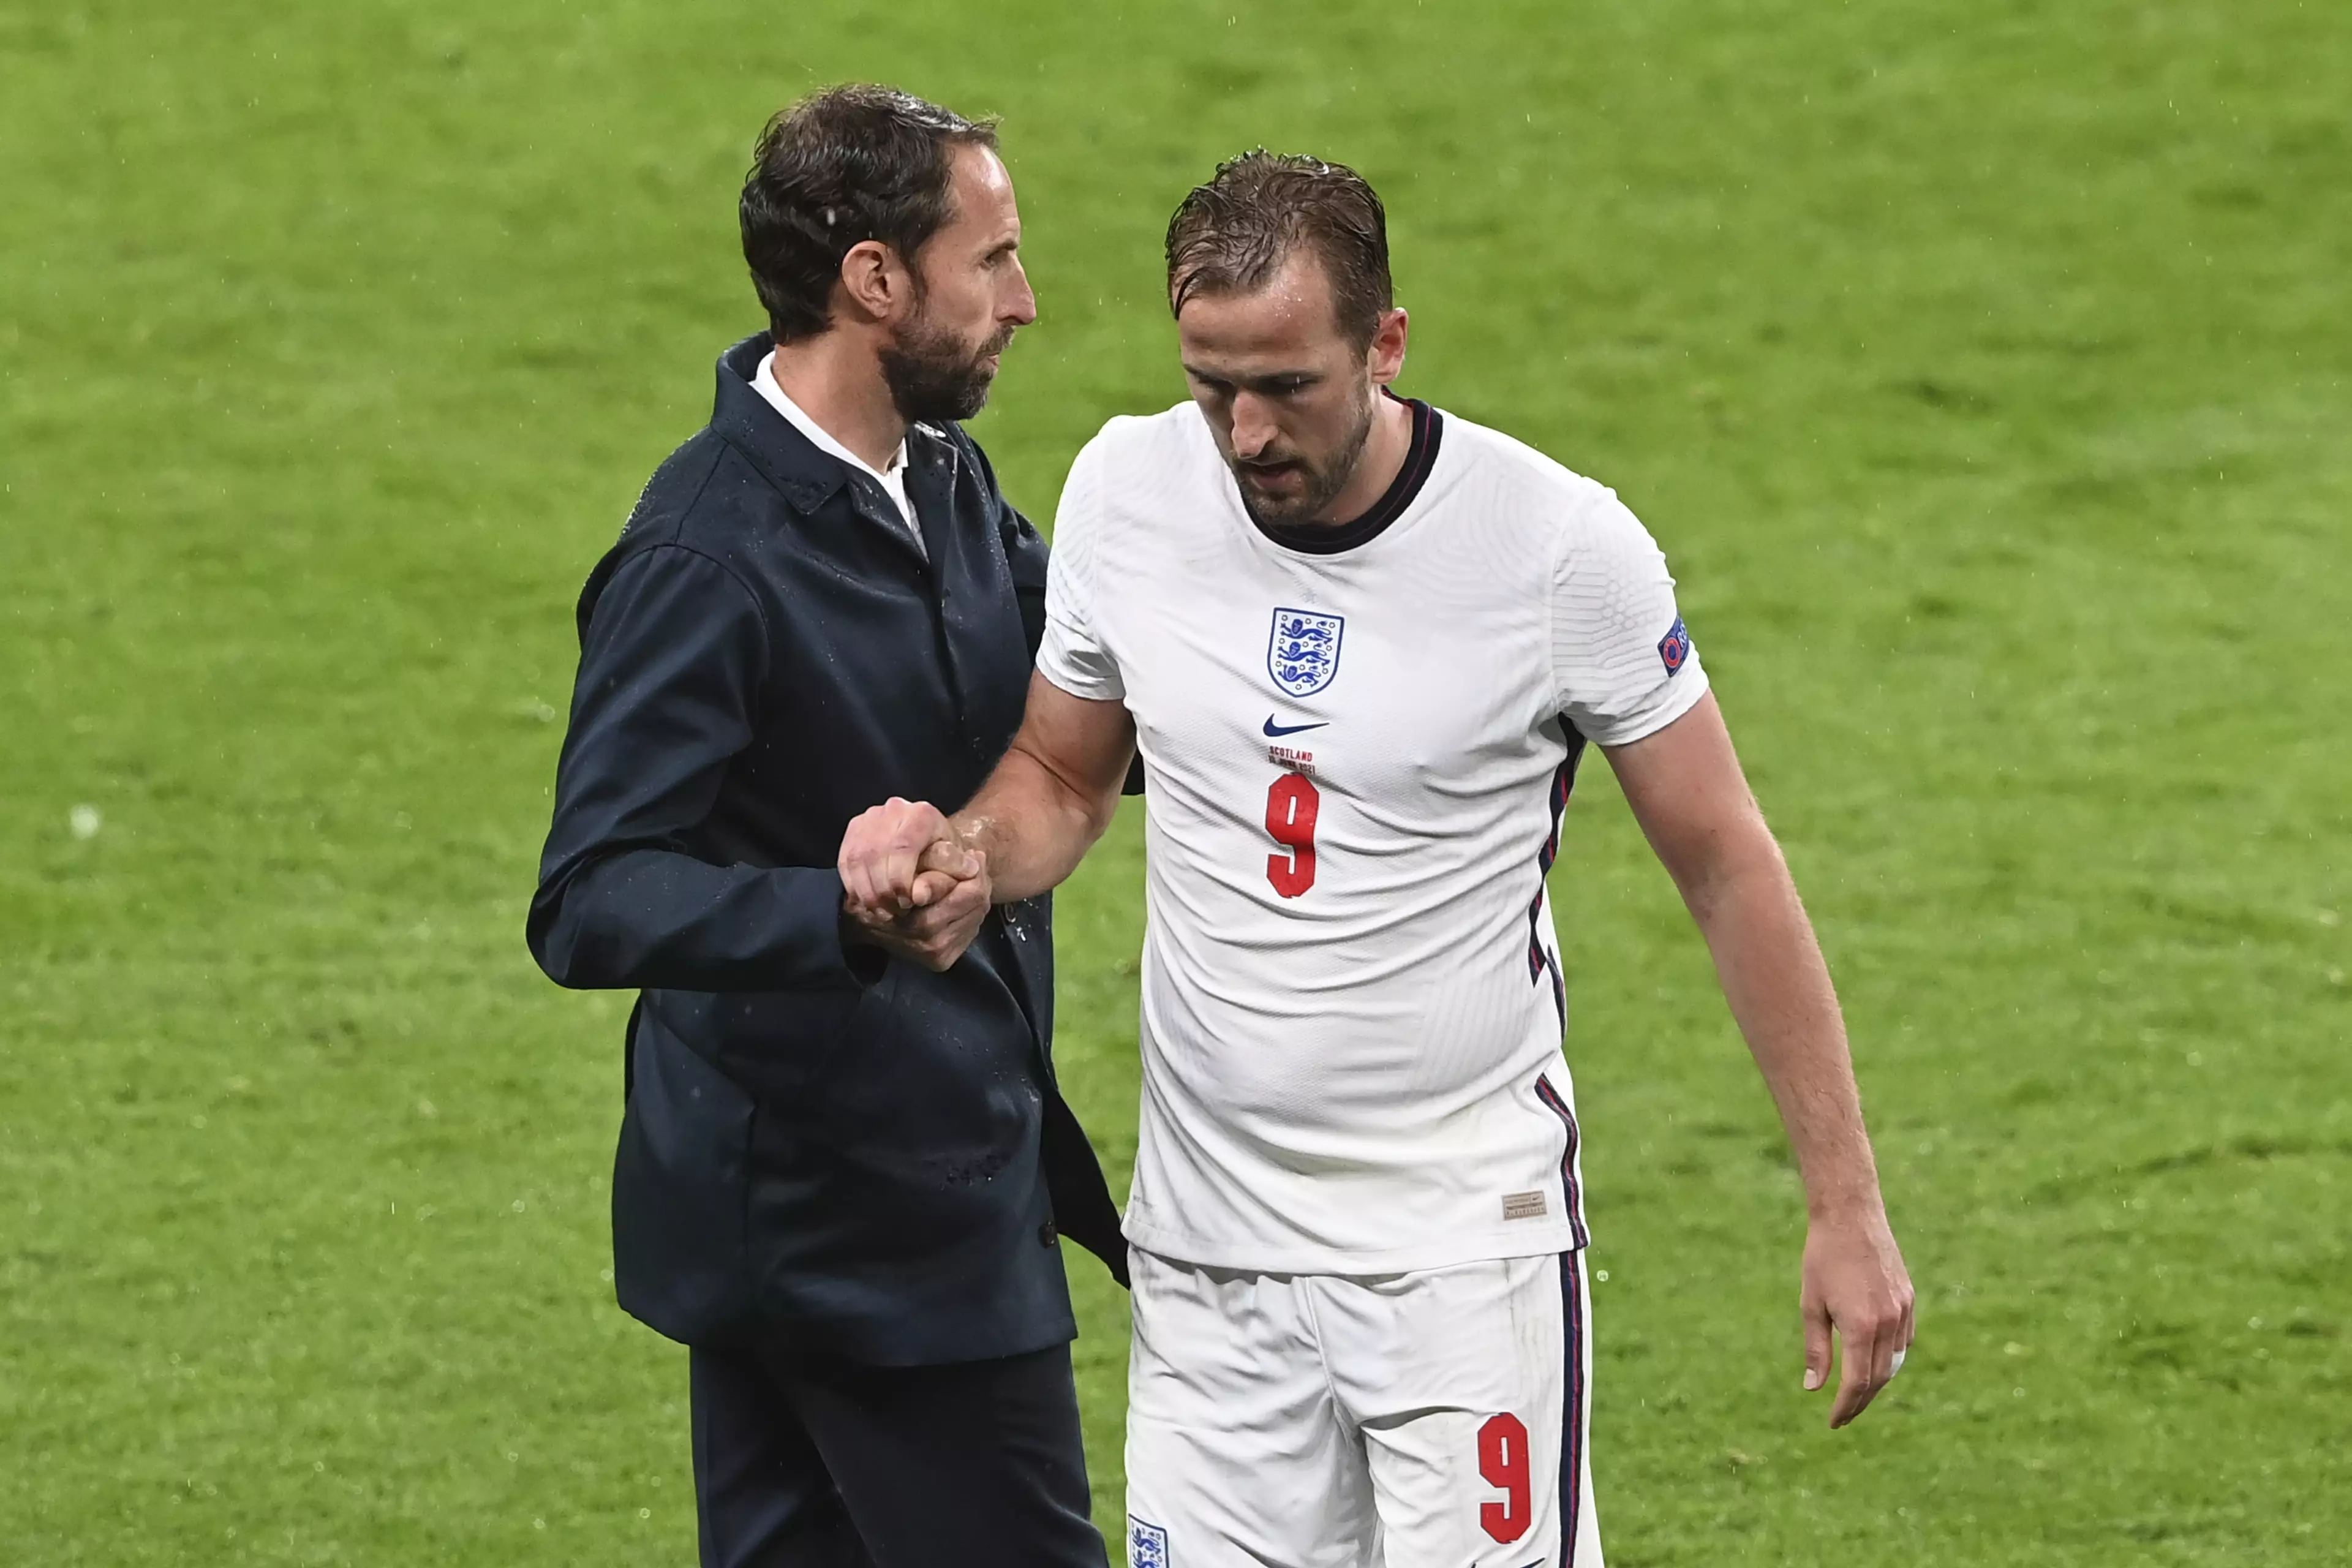 Southgate is backing Kane to come good. Image: PA Images